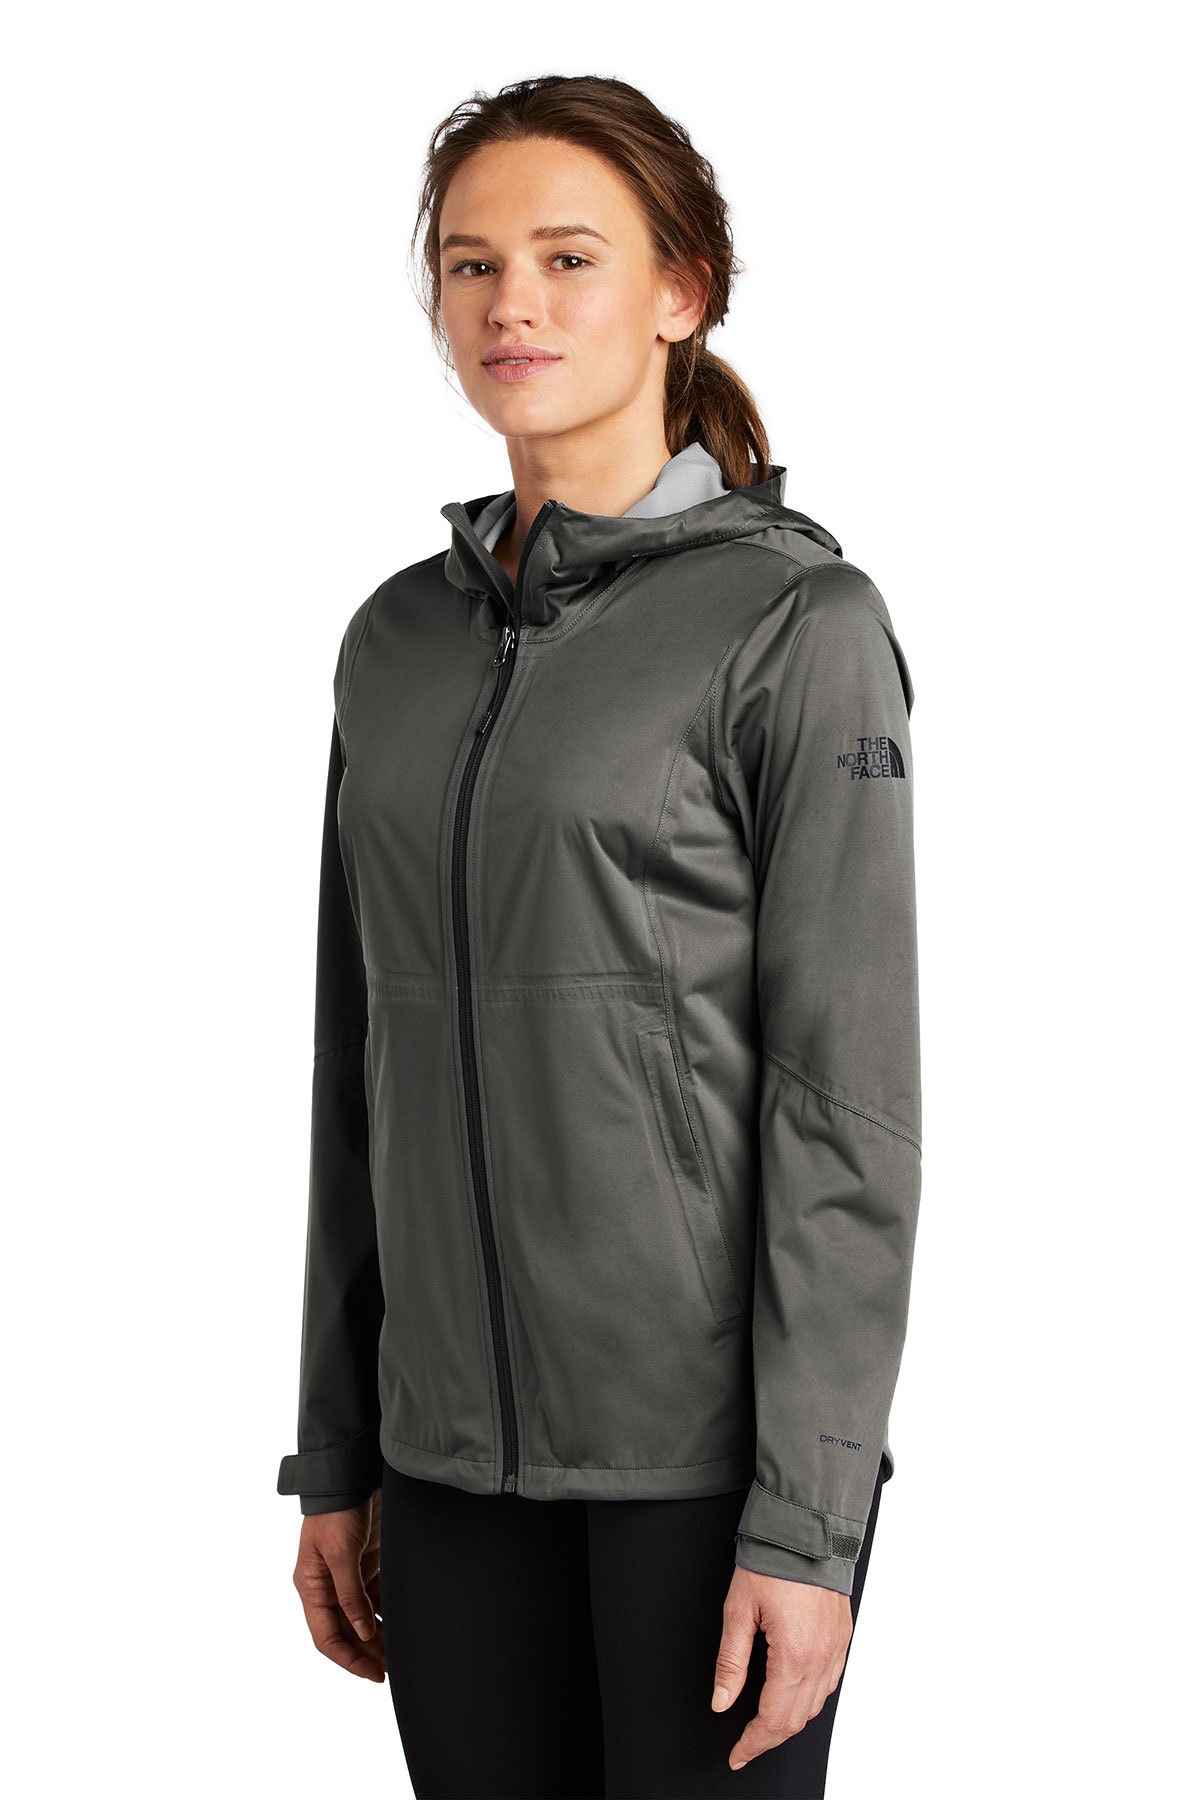 The North Face ® Ladies All Weather Dryvent ™ Stretch Jacket